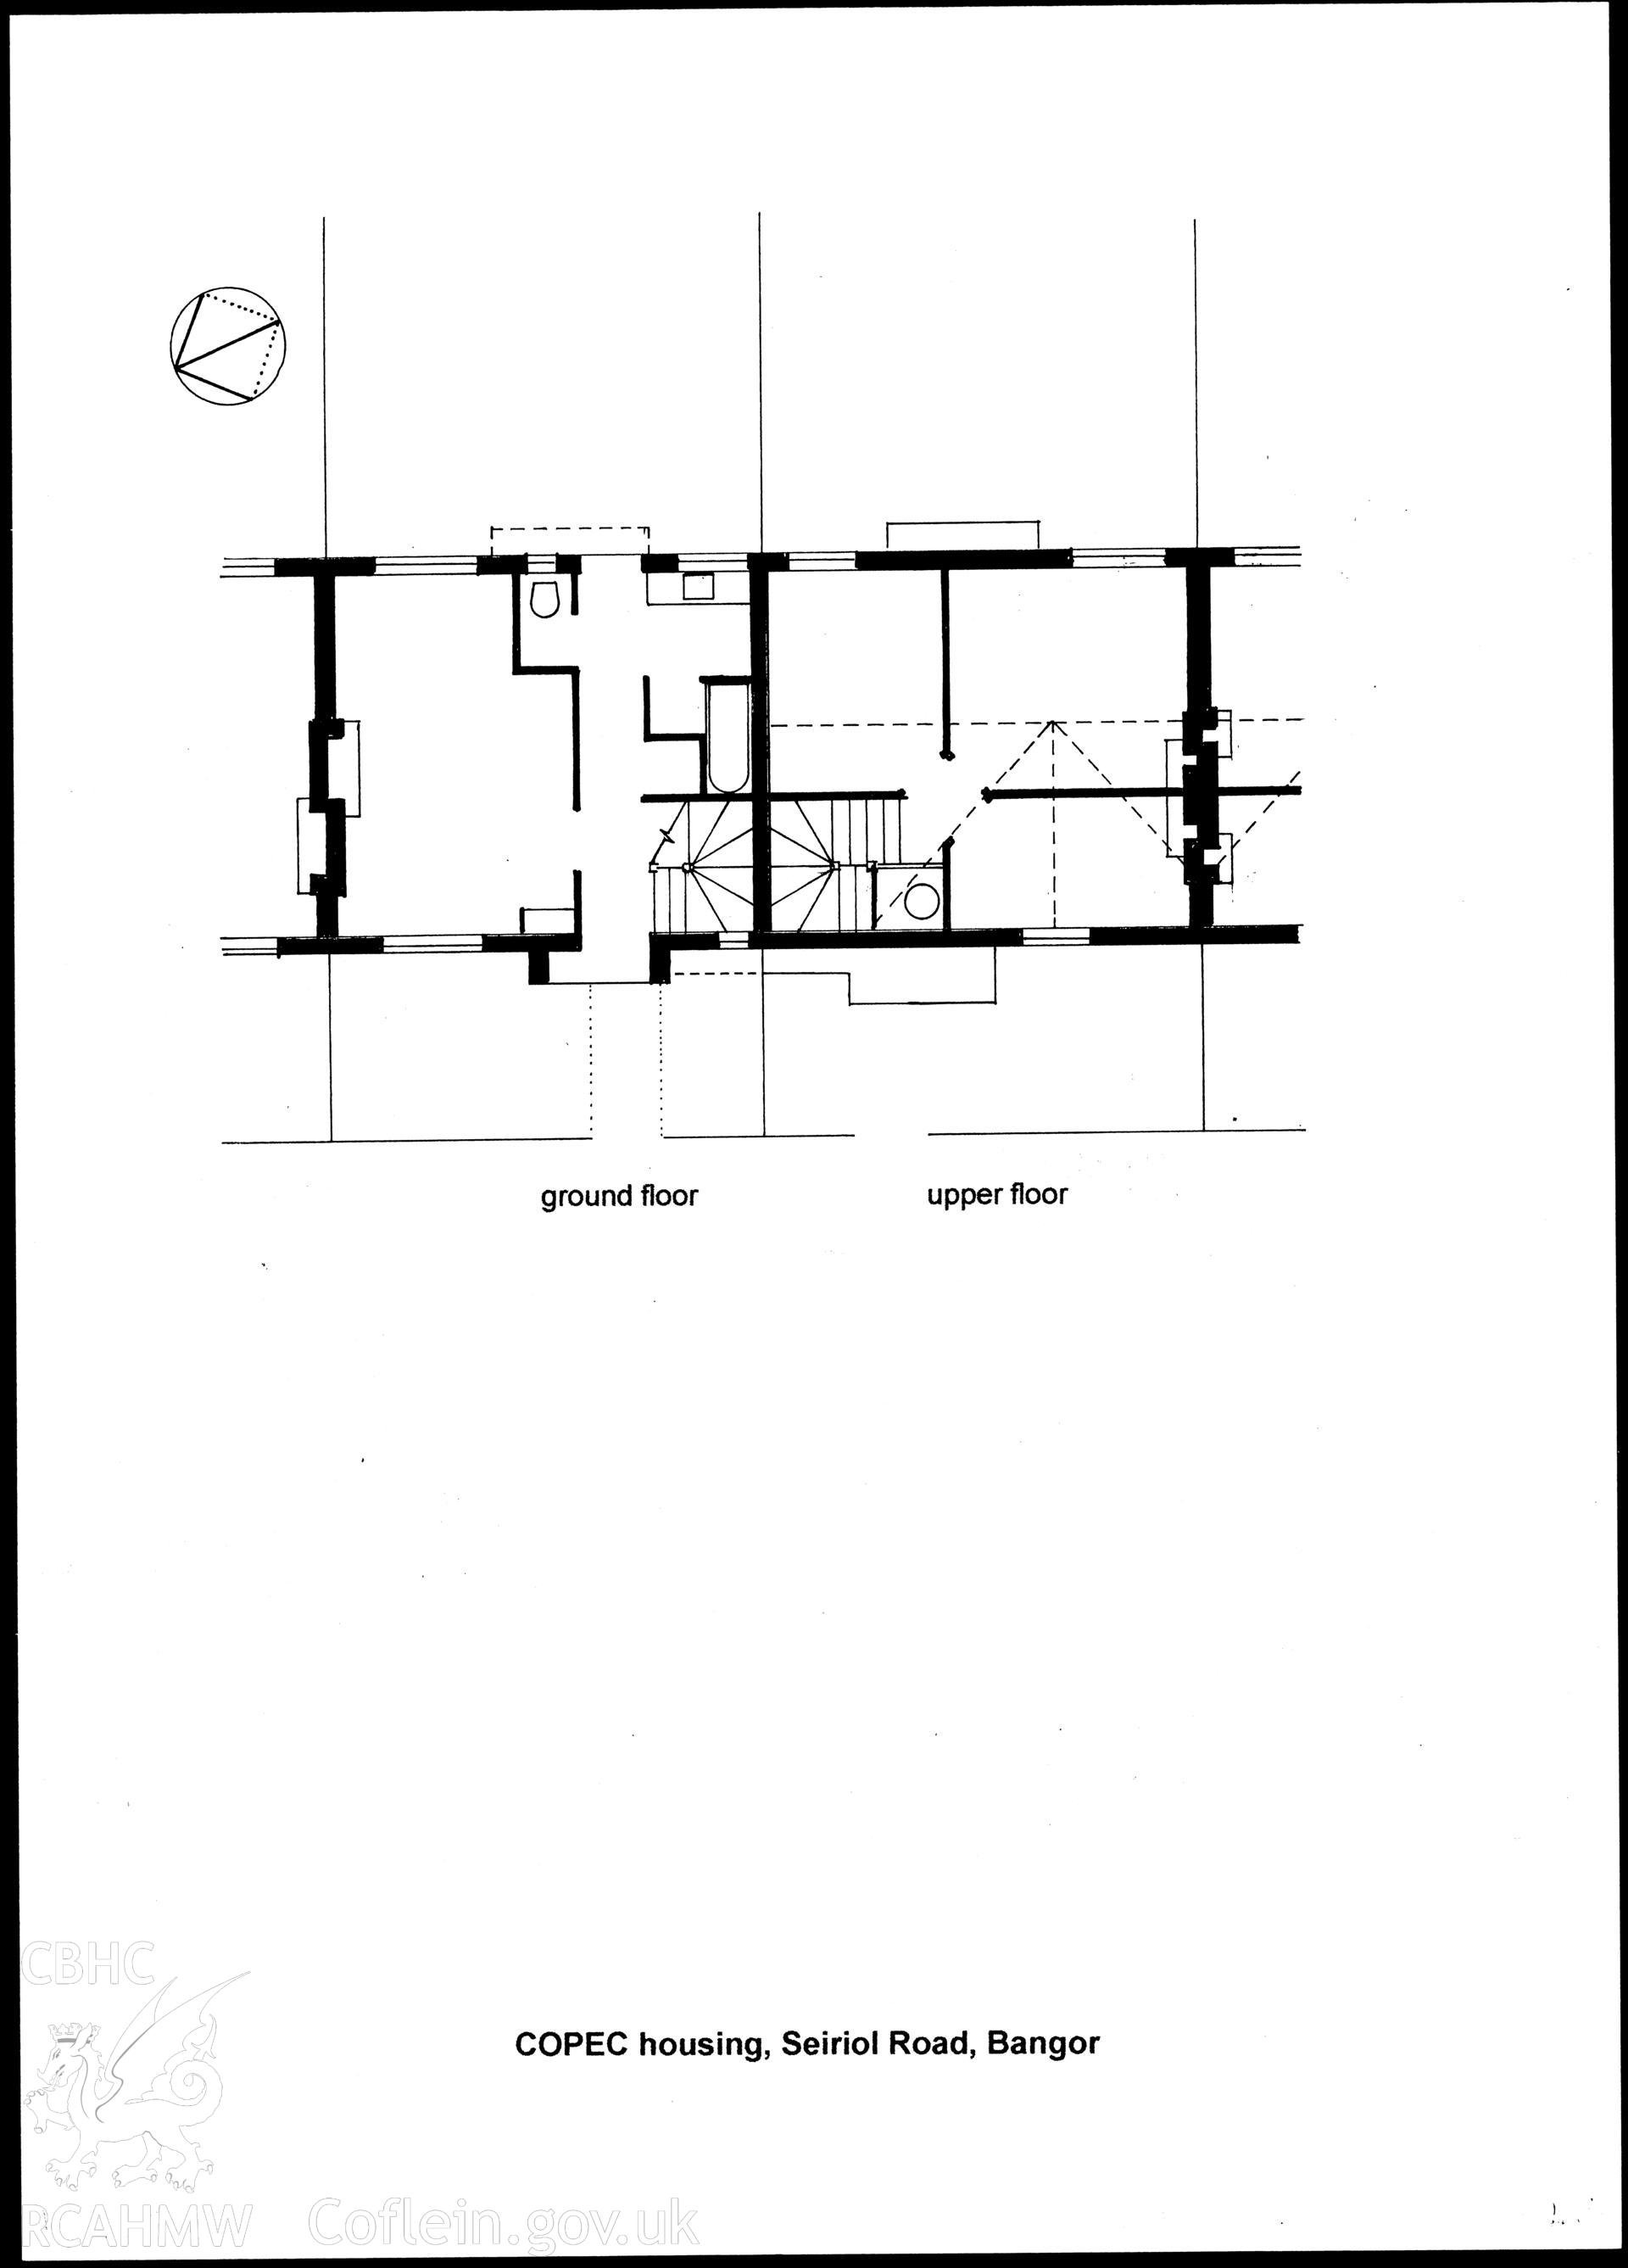 Upper floor and ground floor plans of Copec Housing, Siriol Road, Bangor, produced by Adam Voelcker, 2009. 'Herbert Luck North. Arts and Crafts Architecture for Wales', page 70.